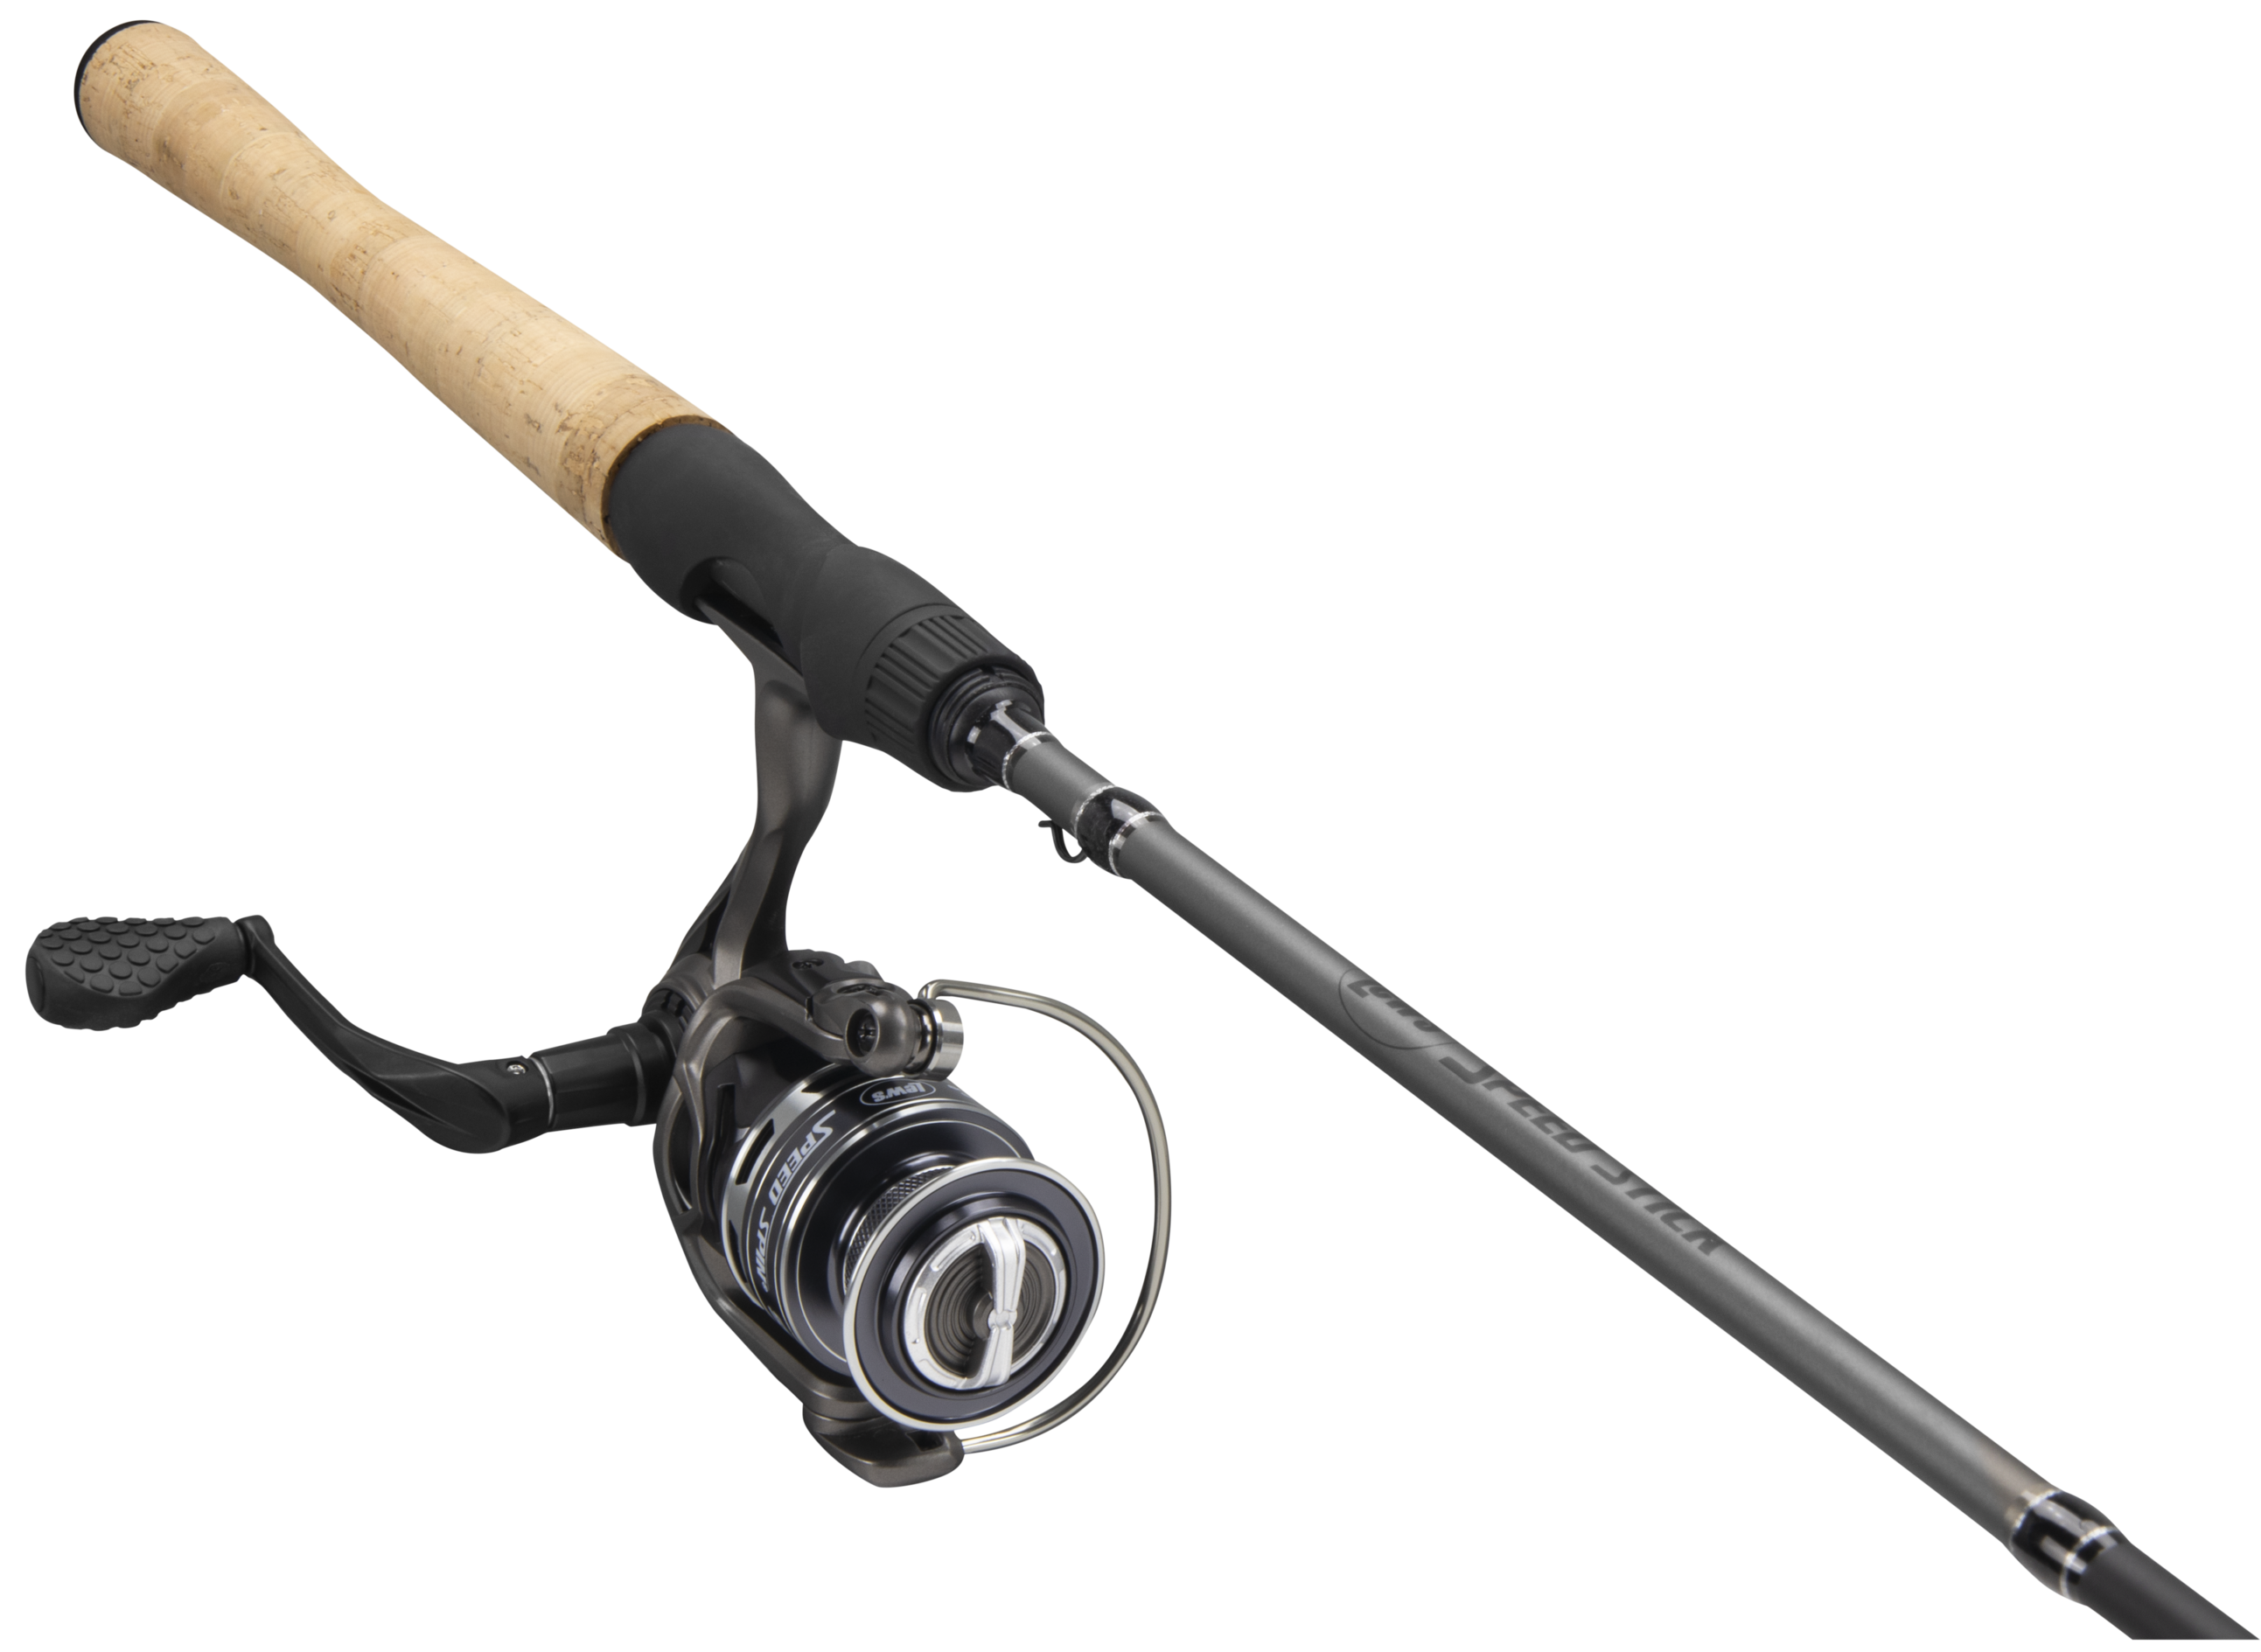 2-Piece 5' Lew's Fishing American Hero We Go 2 Light Spinning Rod & Reel  Combo $19.94 + Free Shipping w/ Prime or on $35+